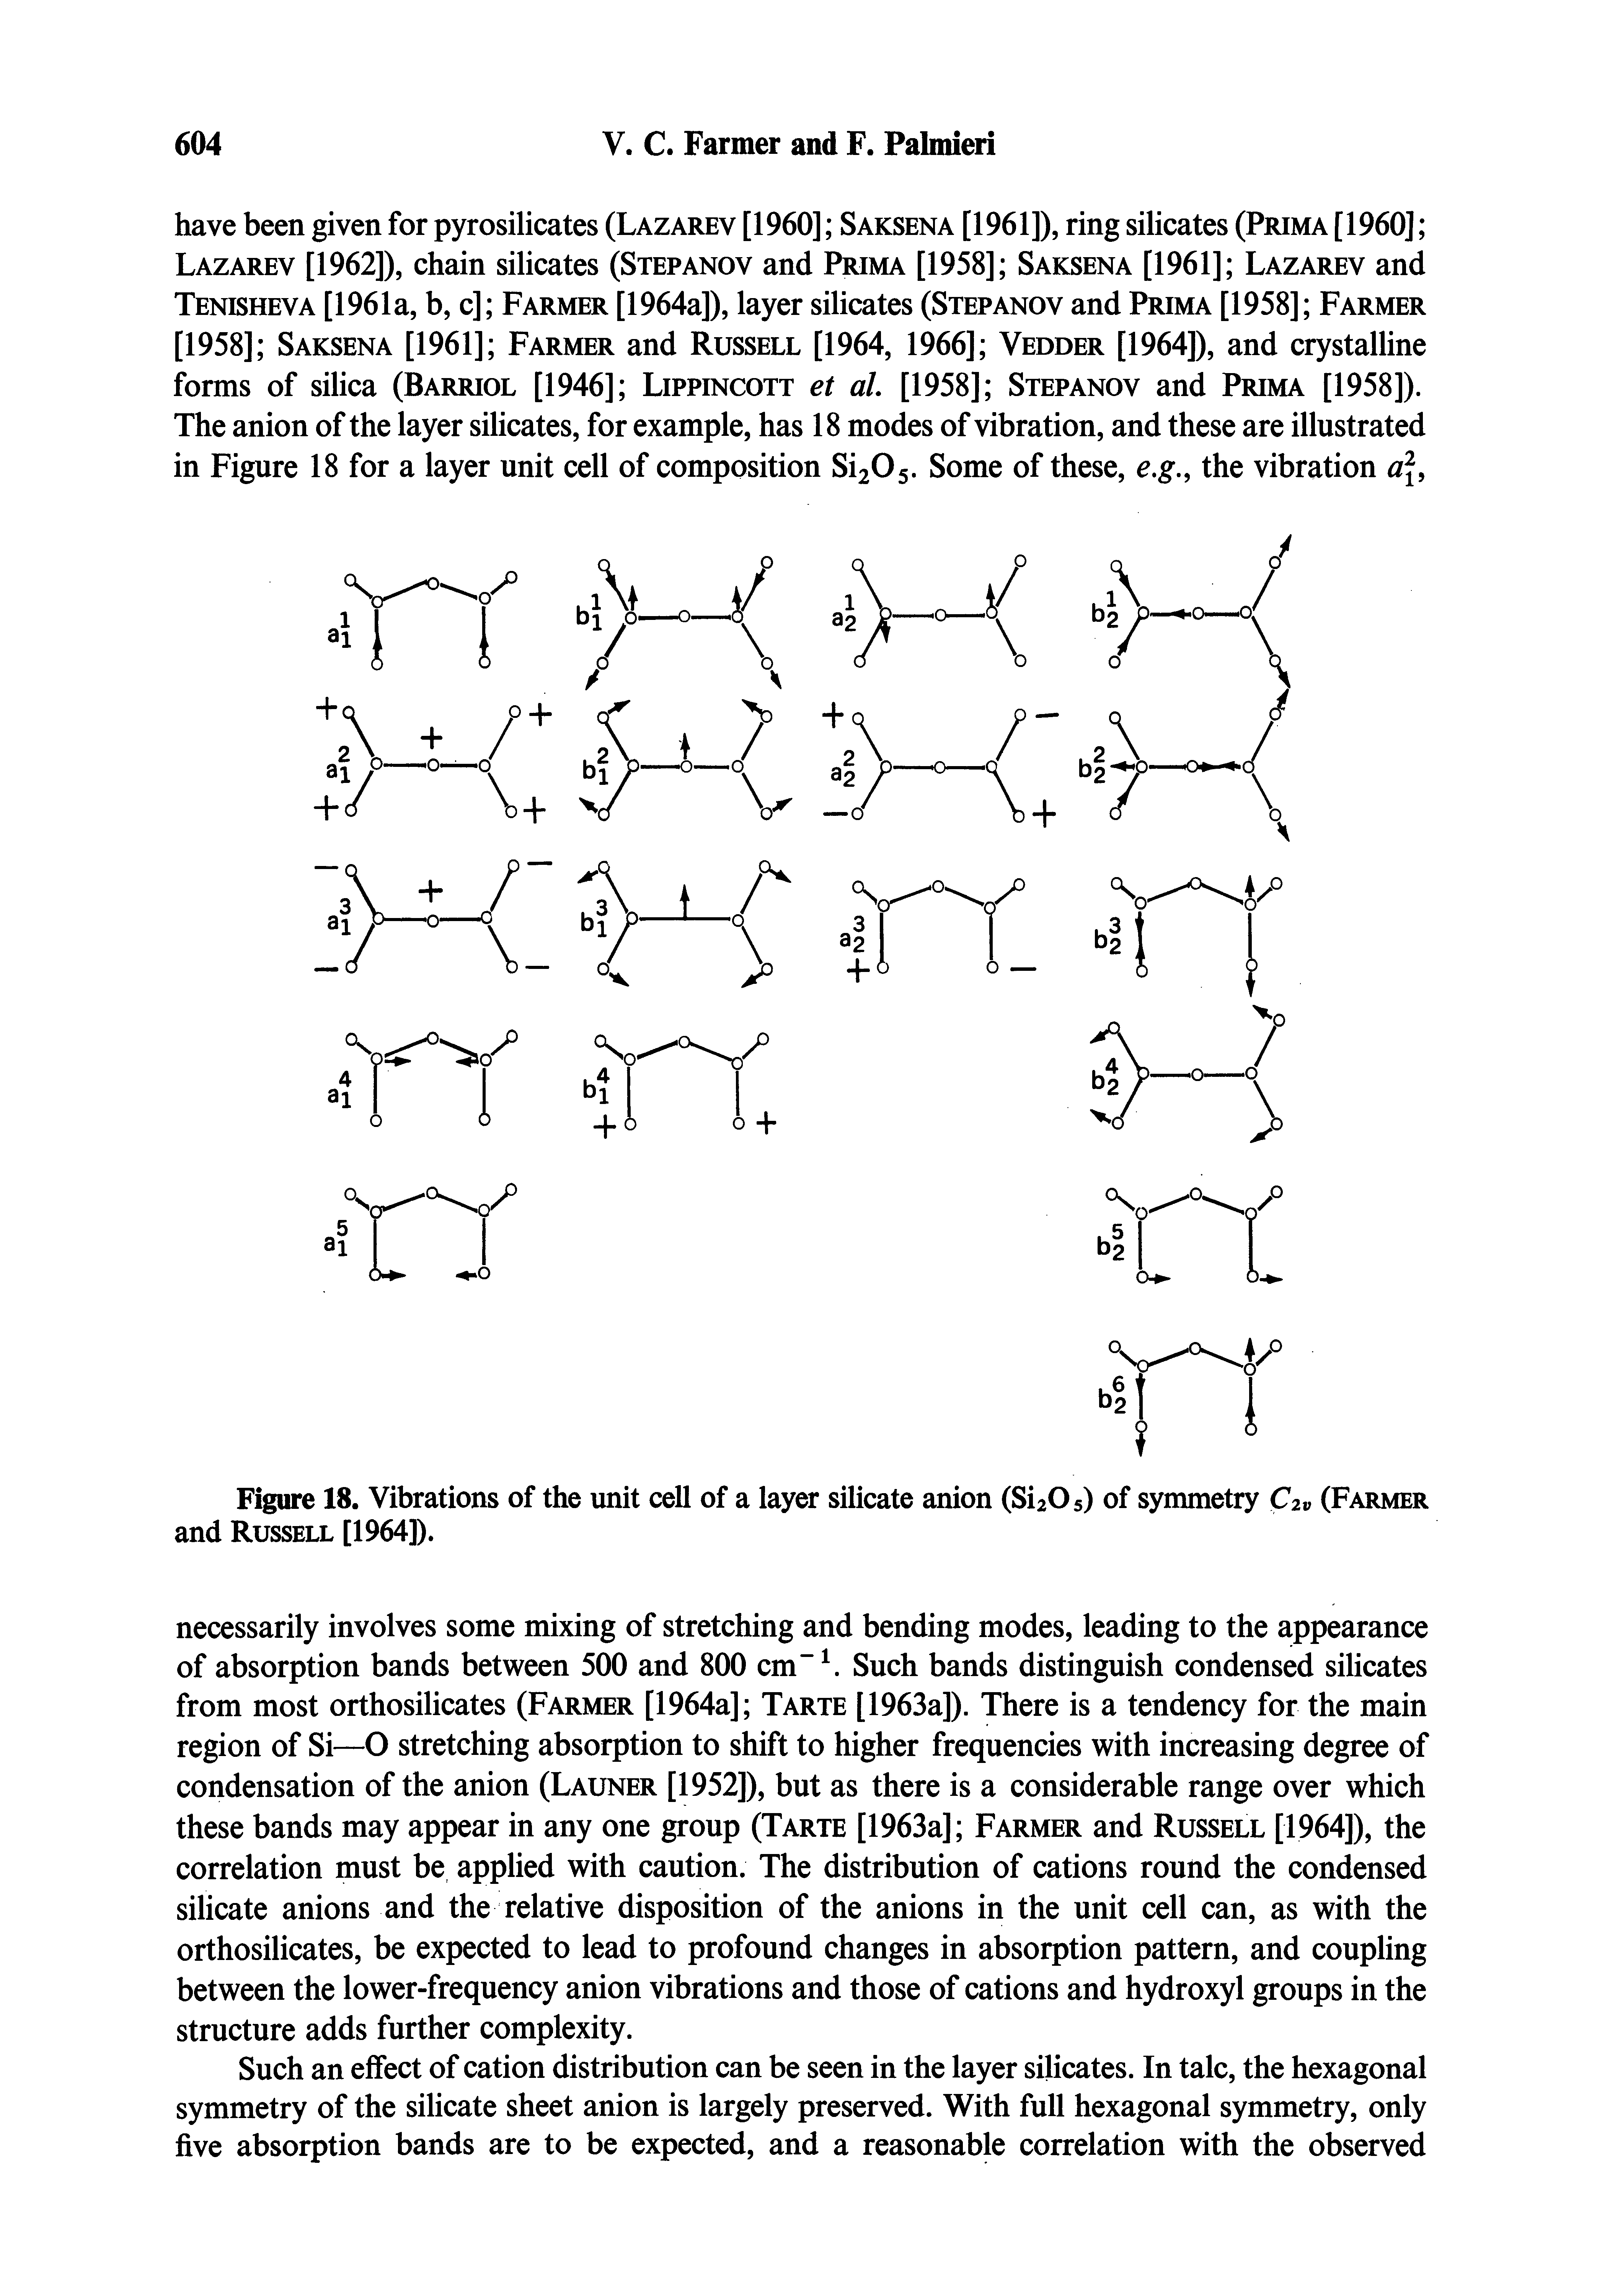 Figure 18. Vibrations of the unit cell of a layer silicate anion (SizOs) of symmetry Civ (Farmer and Russell [1964]).